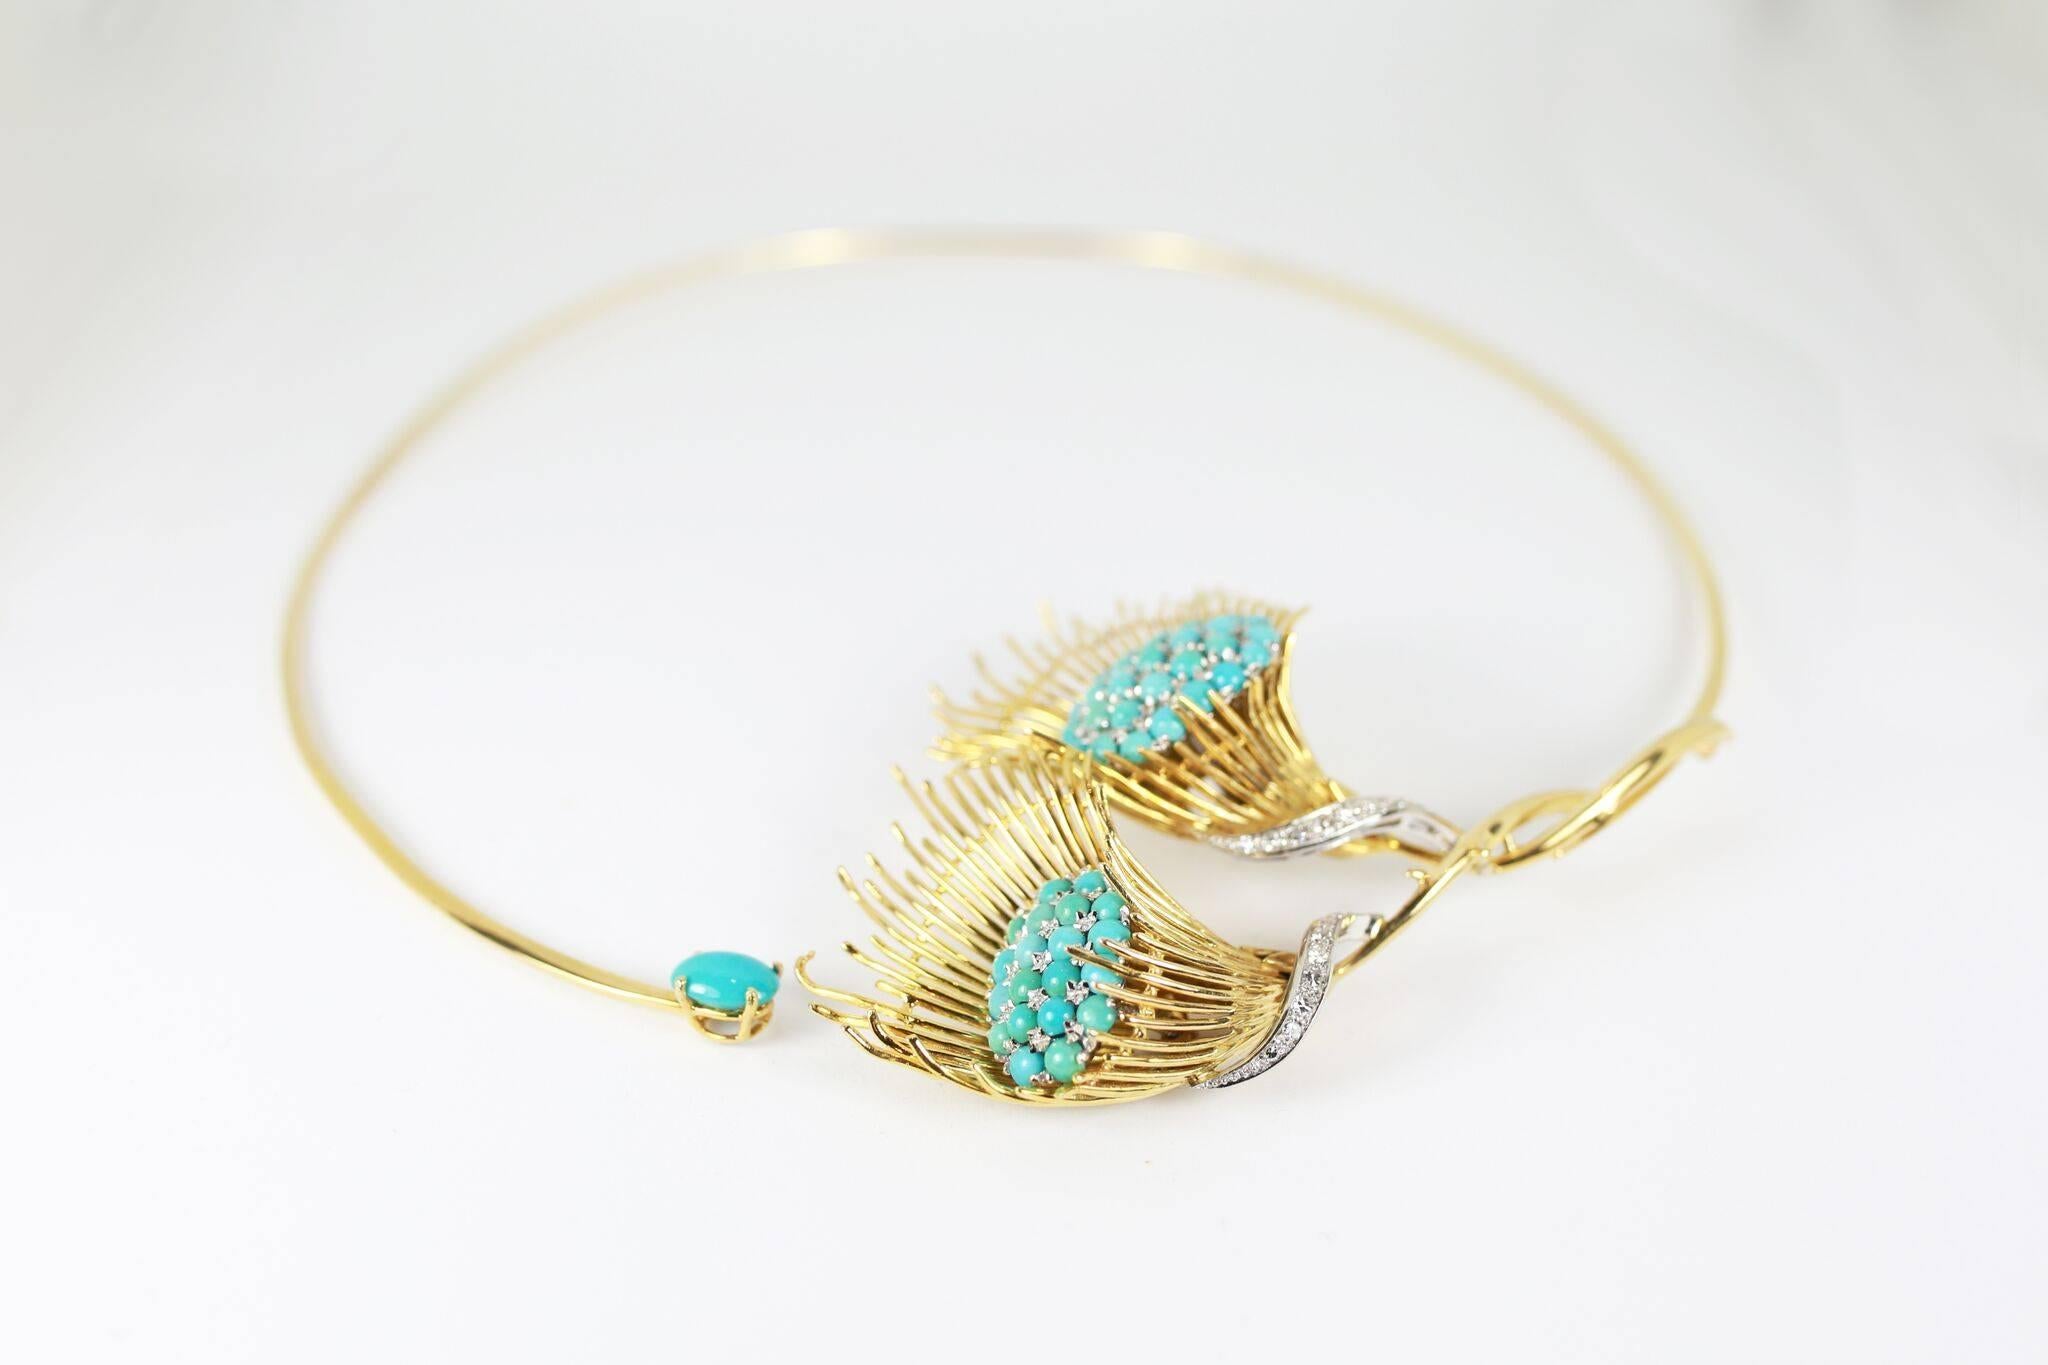 Solid 18K gold turquoise and diamond choker necklace. Beautifully crafted.